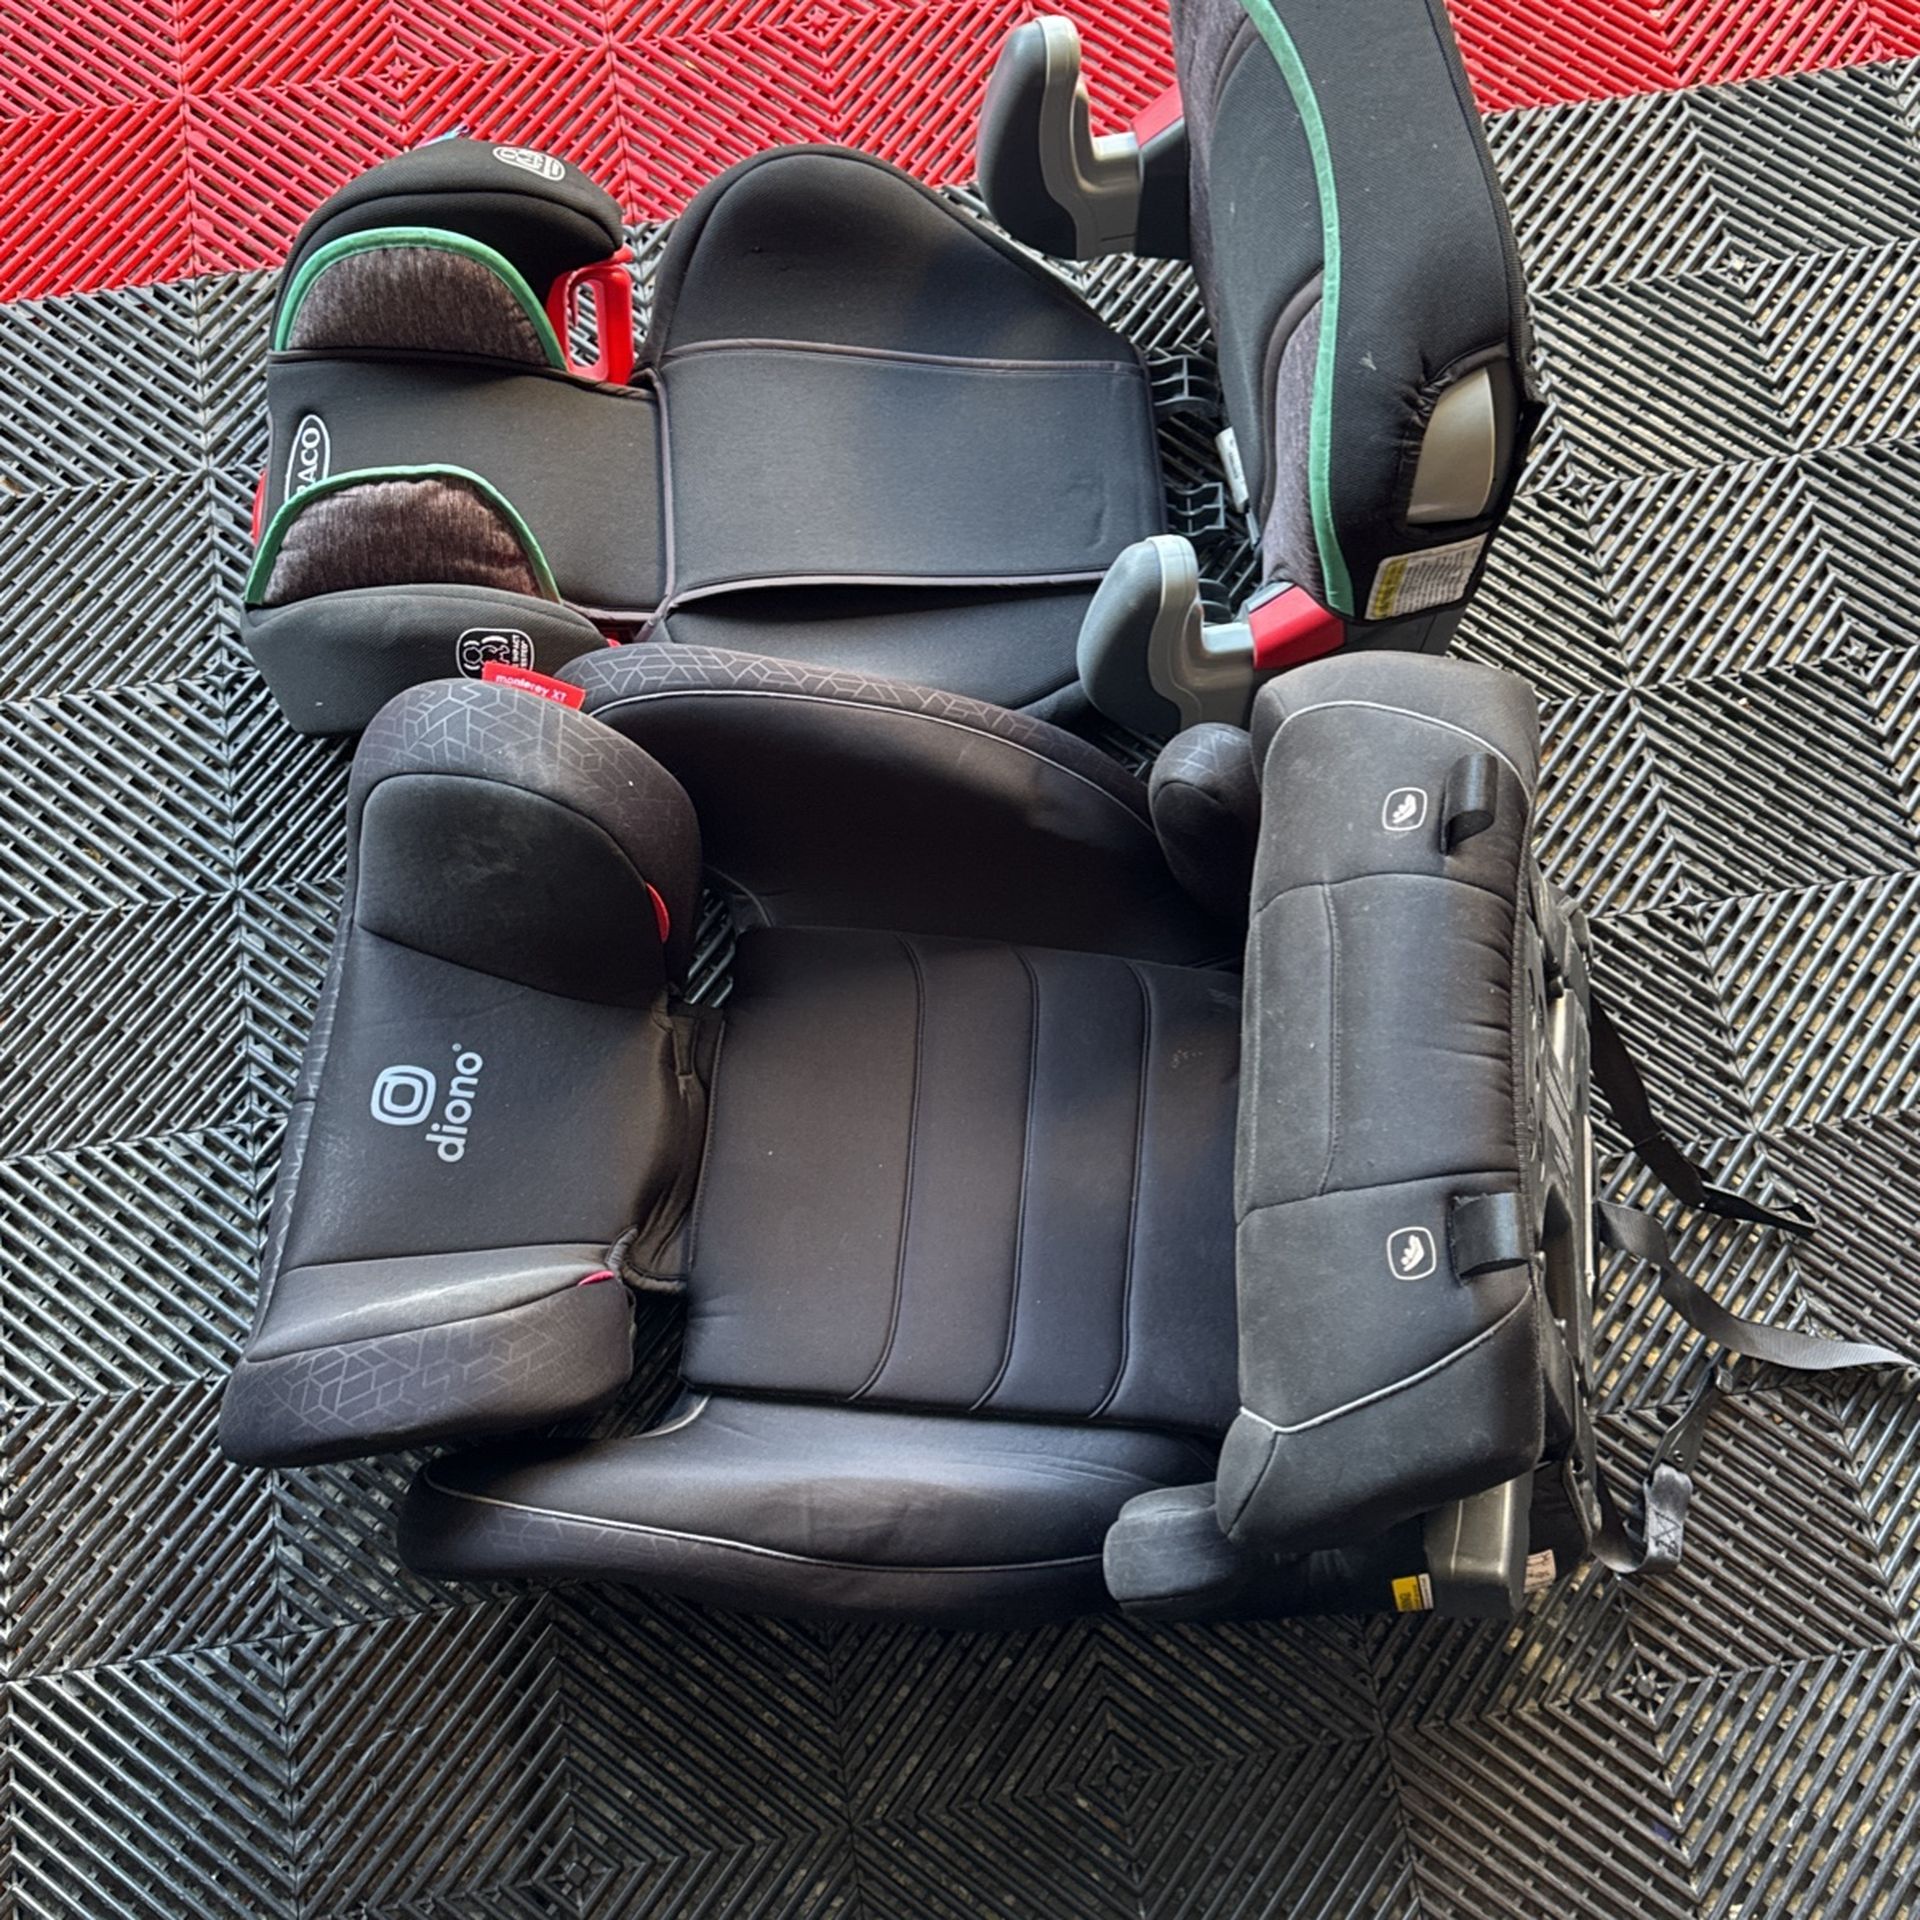 Graco And Diono Booster Seats